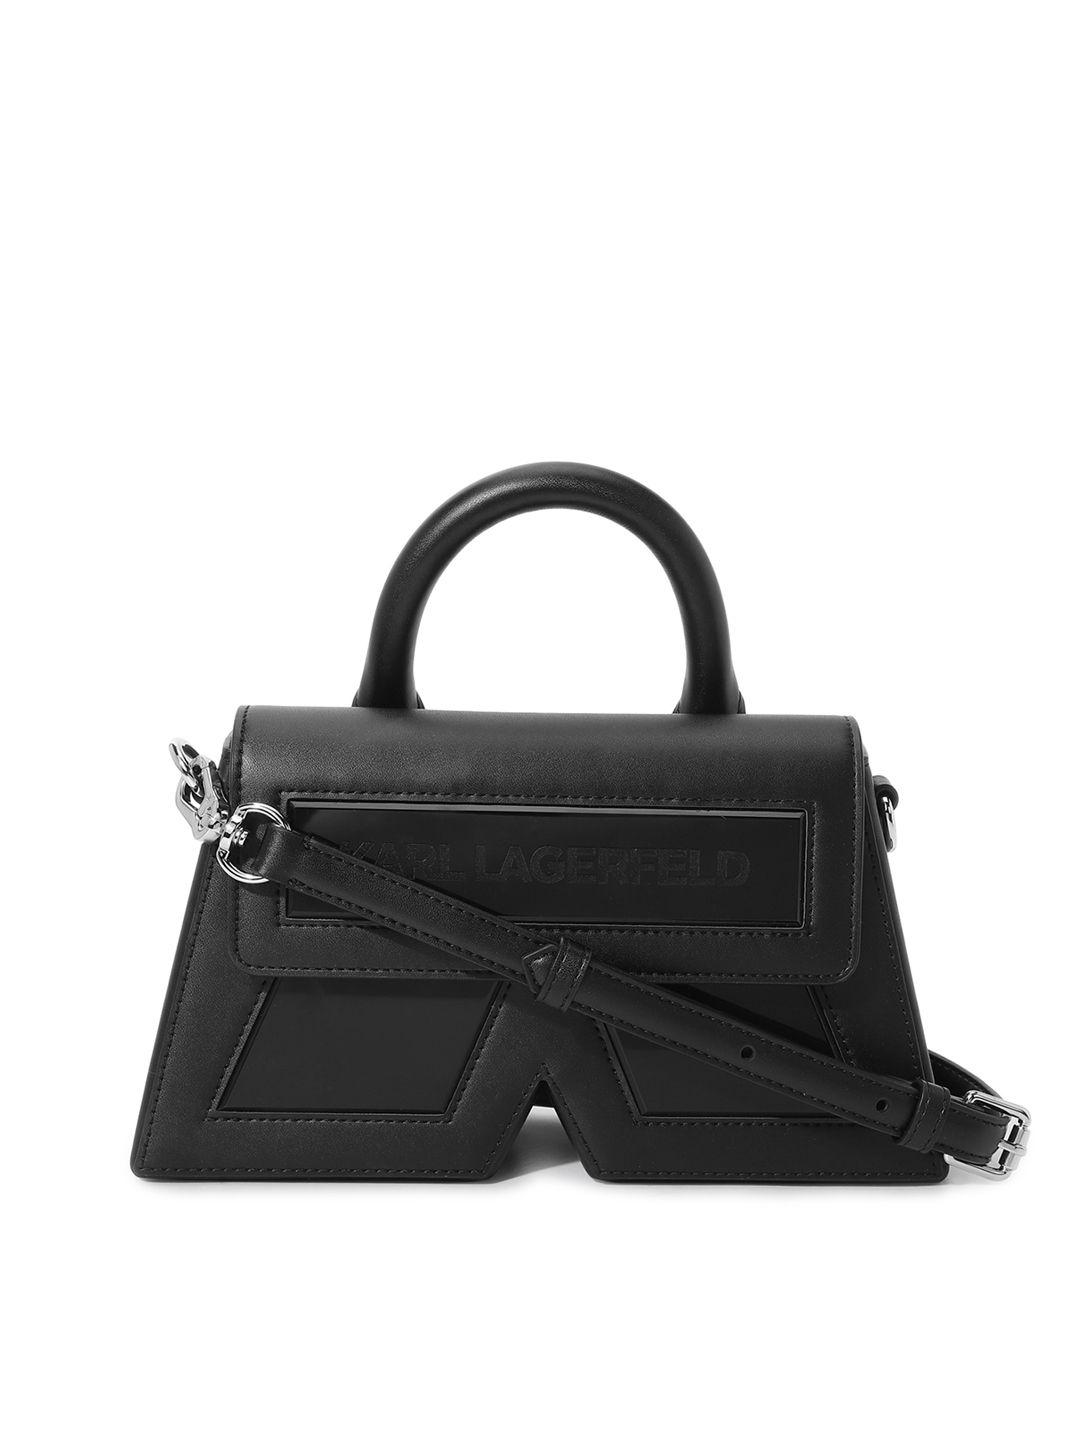 karl lagerfeld leather structured handheld bag